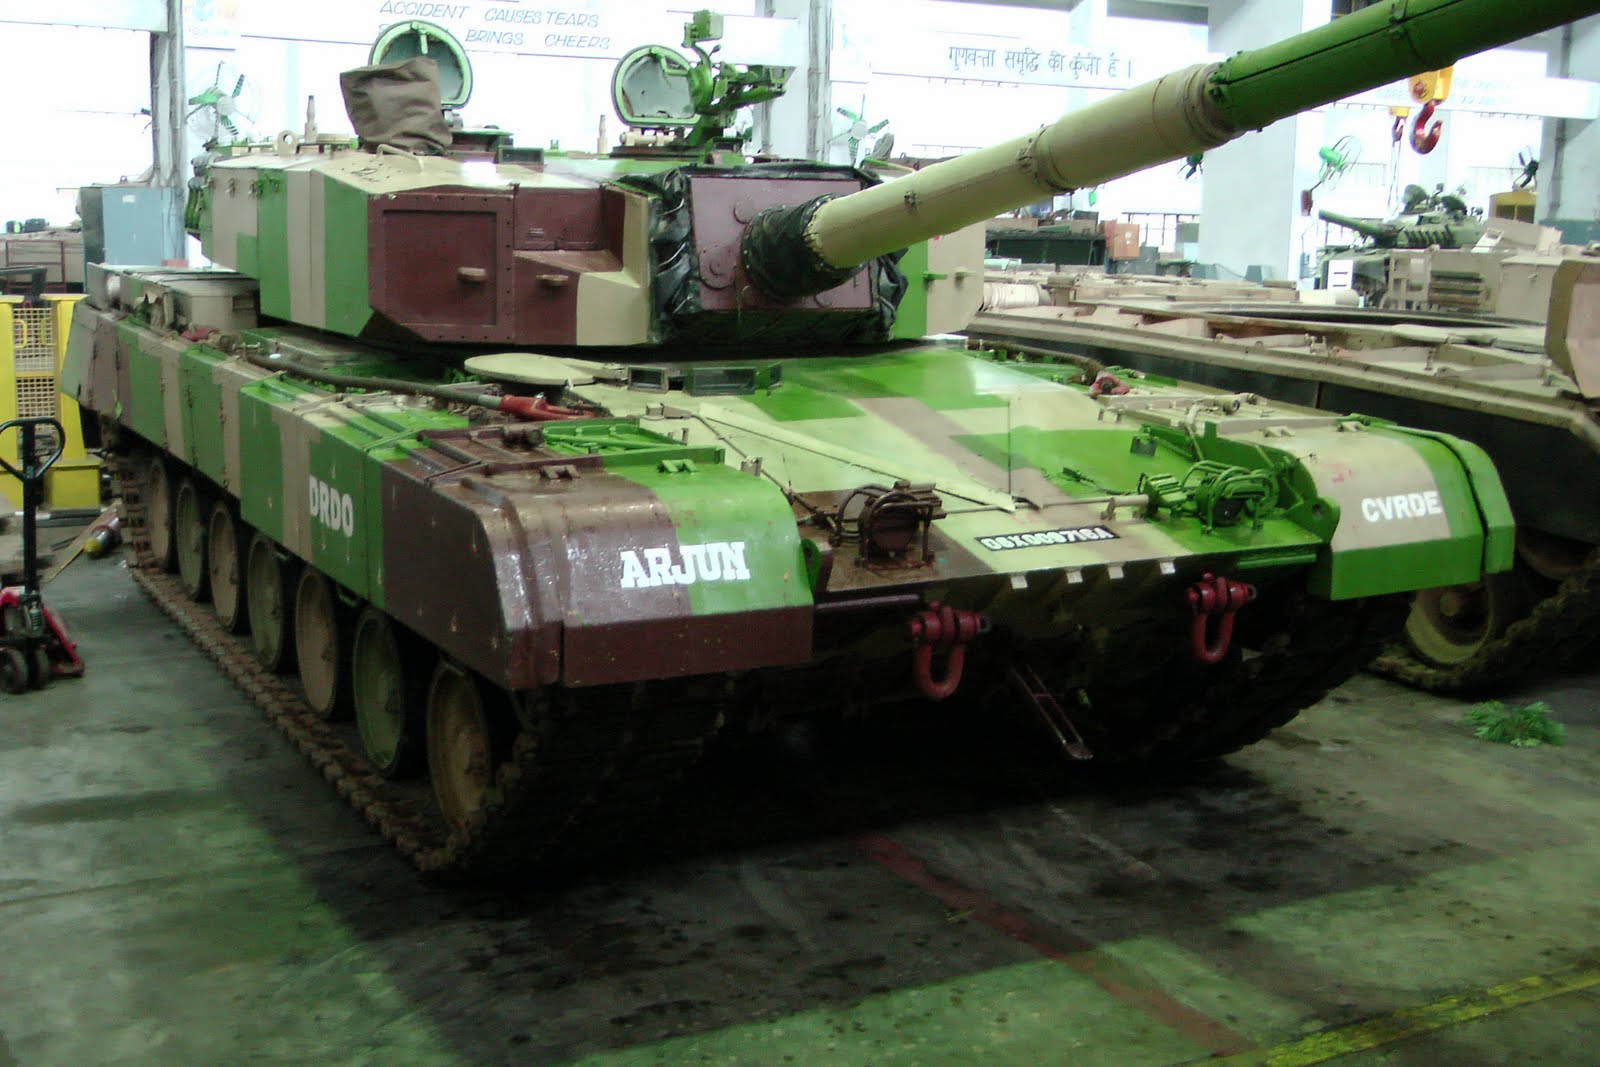 Broadsword: Heavier, more lethal Arjun tank poised for trials